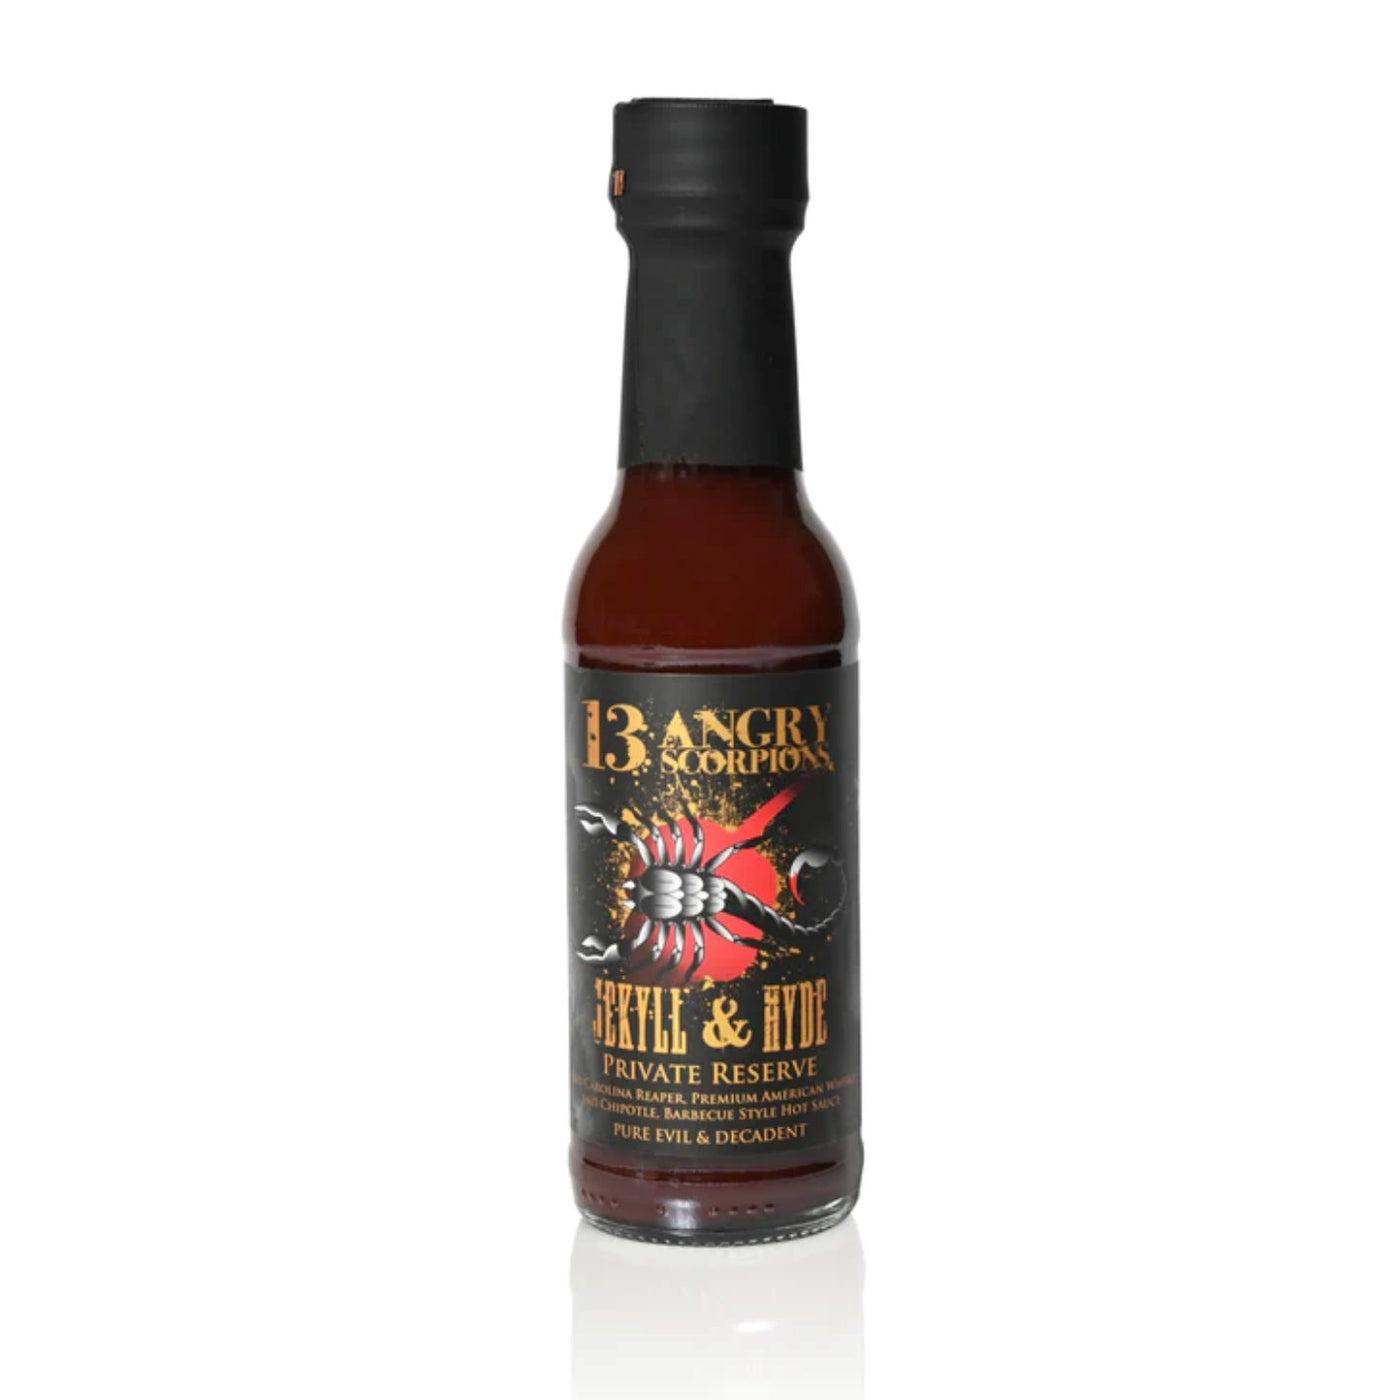 13 Angry Scorpions Jekyll & Hyde Private Reserve Hot Sauce 150ml